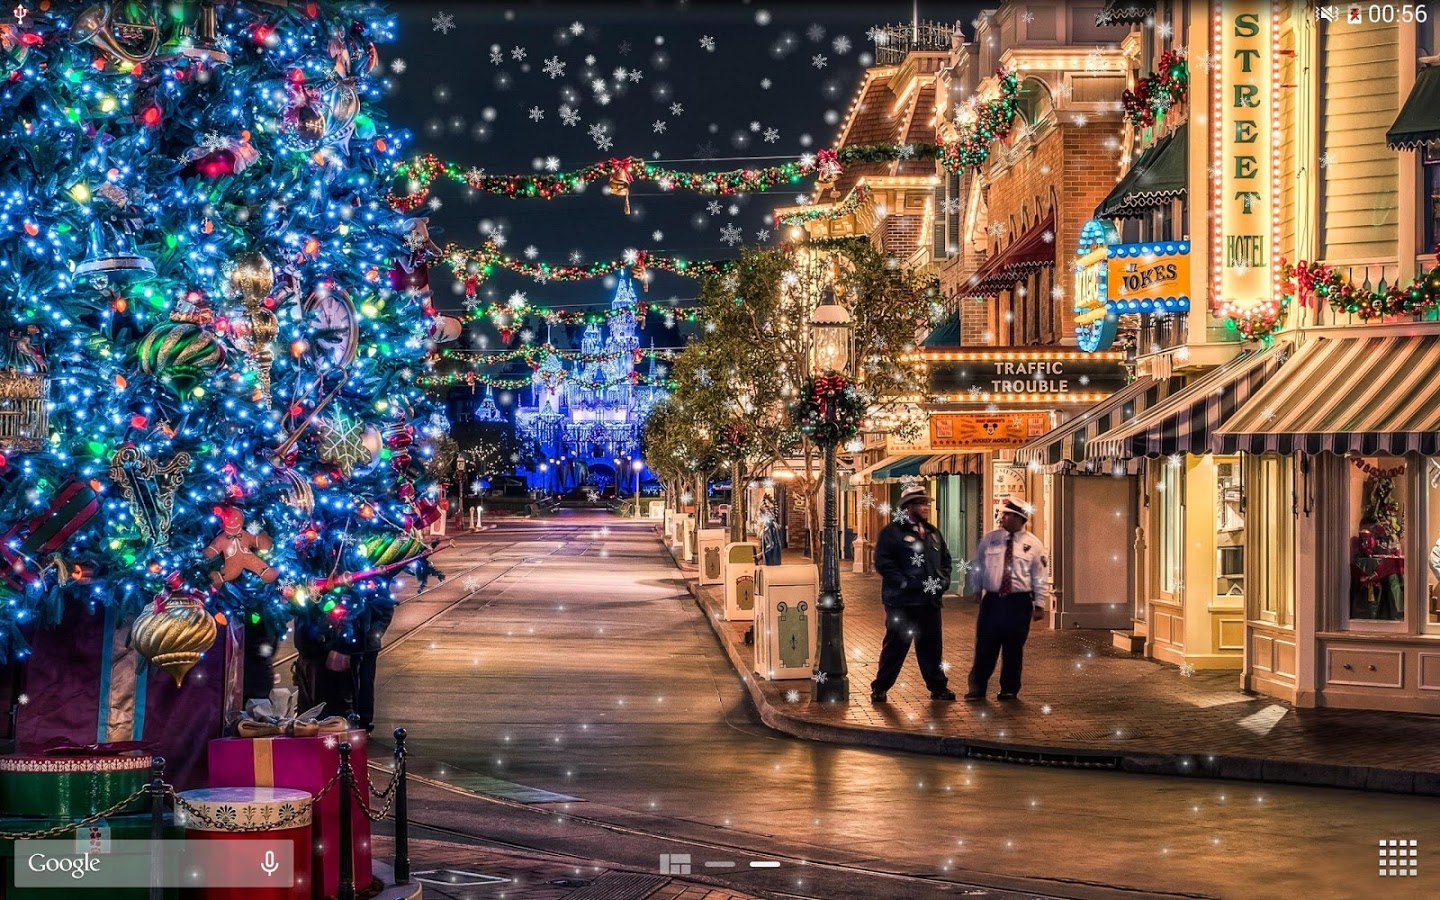 Snow Night City live wallpaper   Android Apps on Google Play